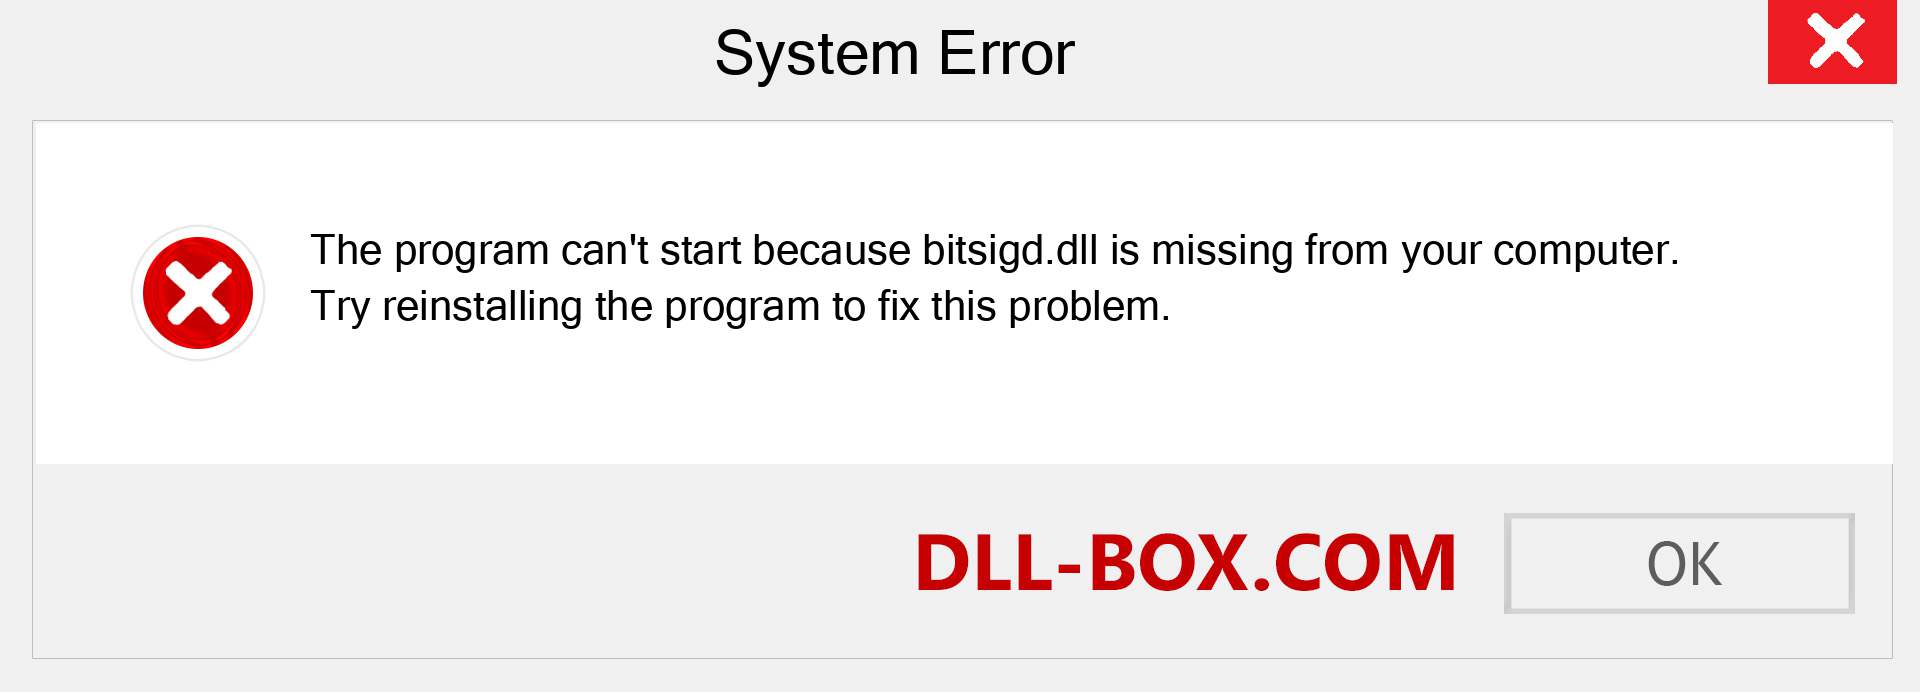  bitsigd.dll file is missing?. Download for Windows 7, 8, 10 - Fix  bitsigd dll Missing Error on Windows, photos, images